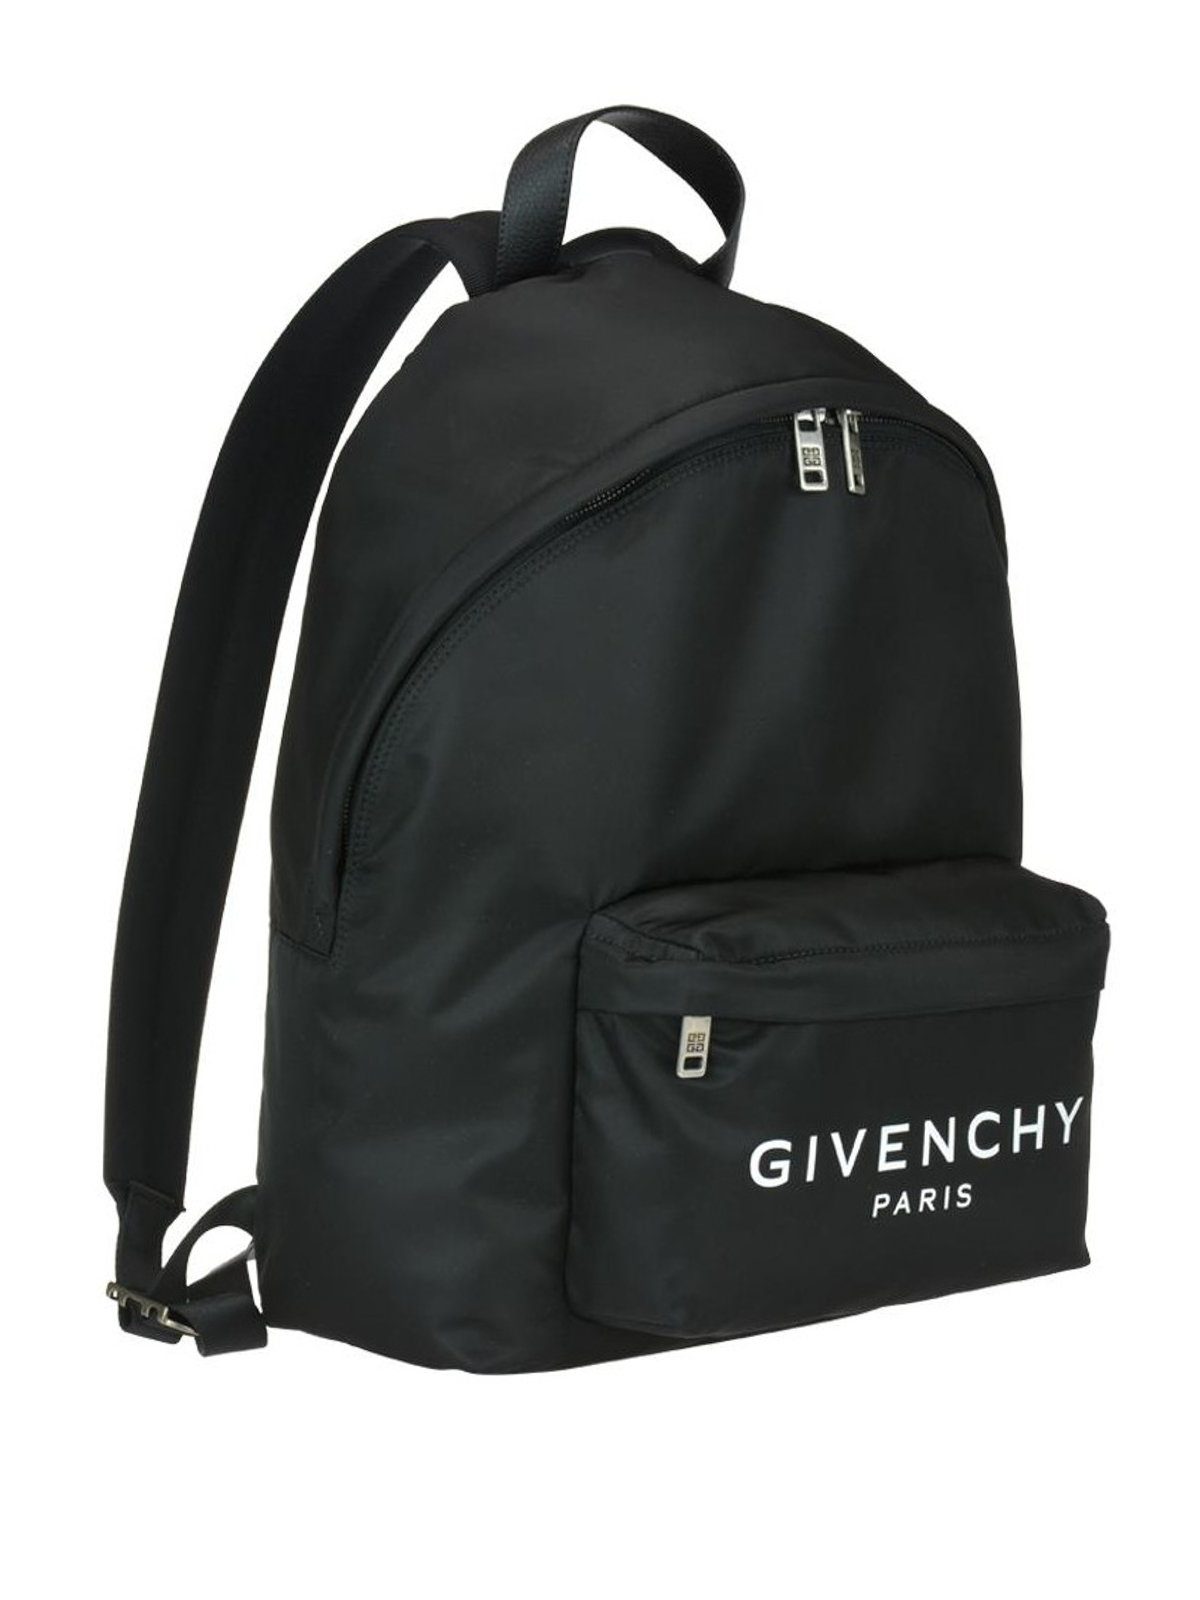 Givenchy Paris embroidered nylon 